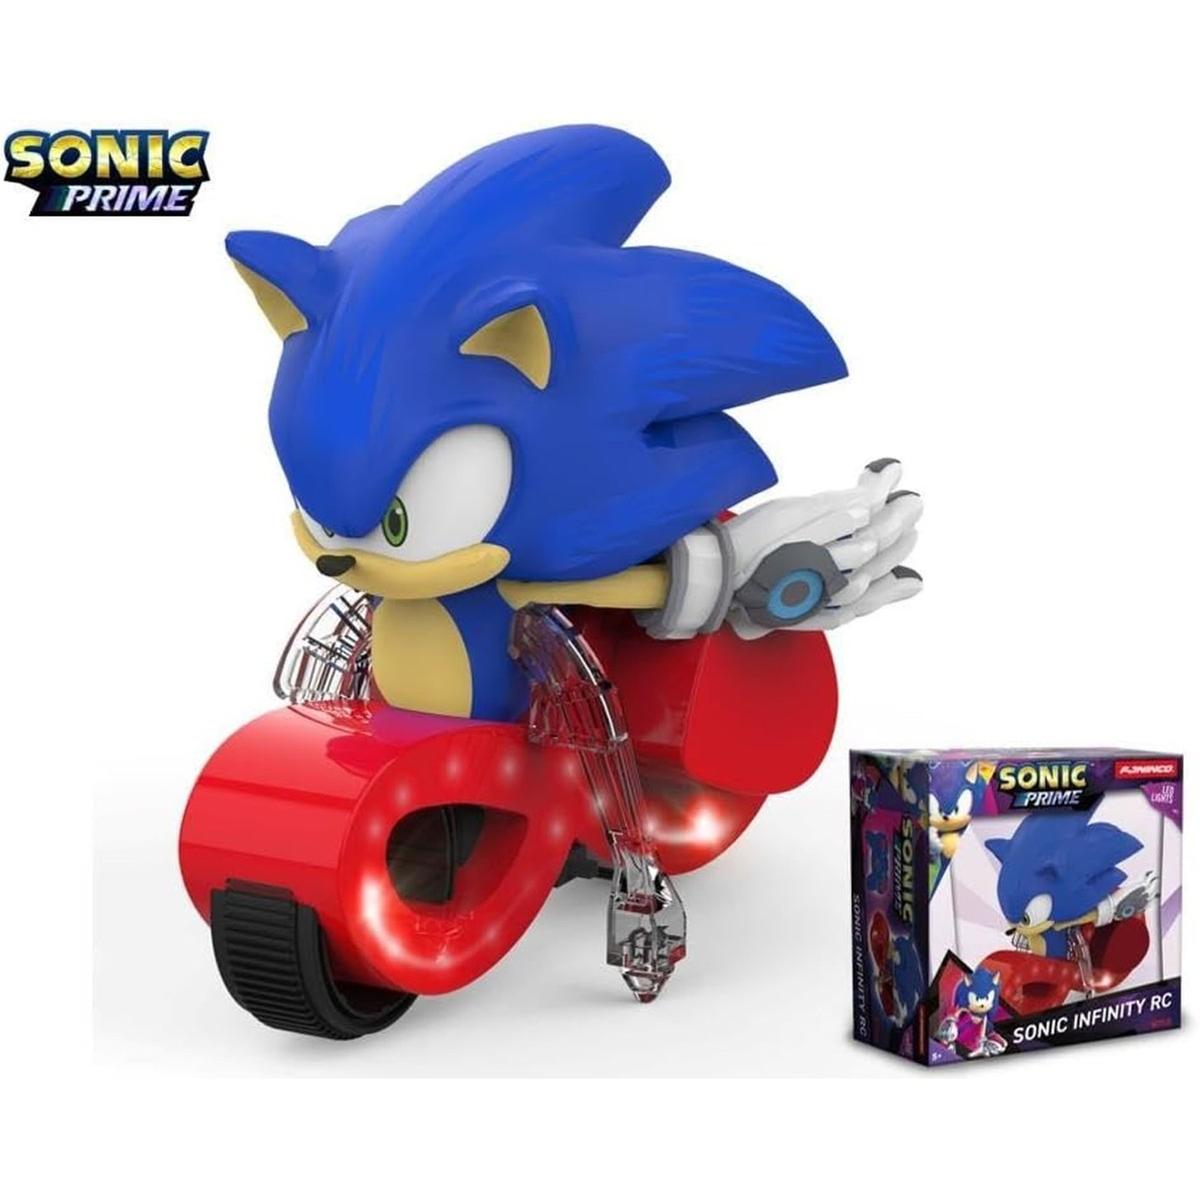 PMI to launch novelty toys and games for Sonic Prime - Mojo Nation